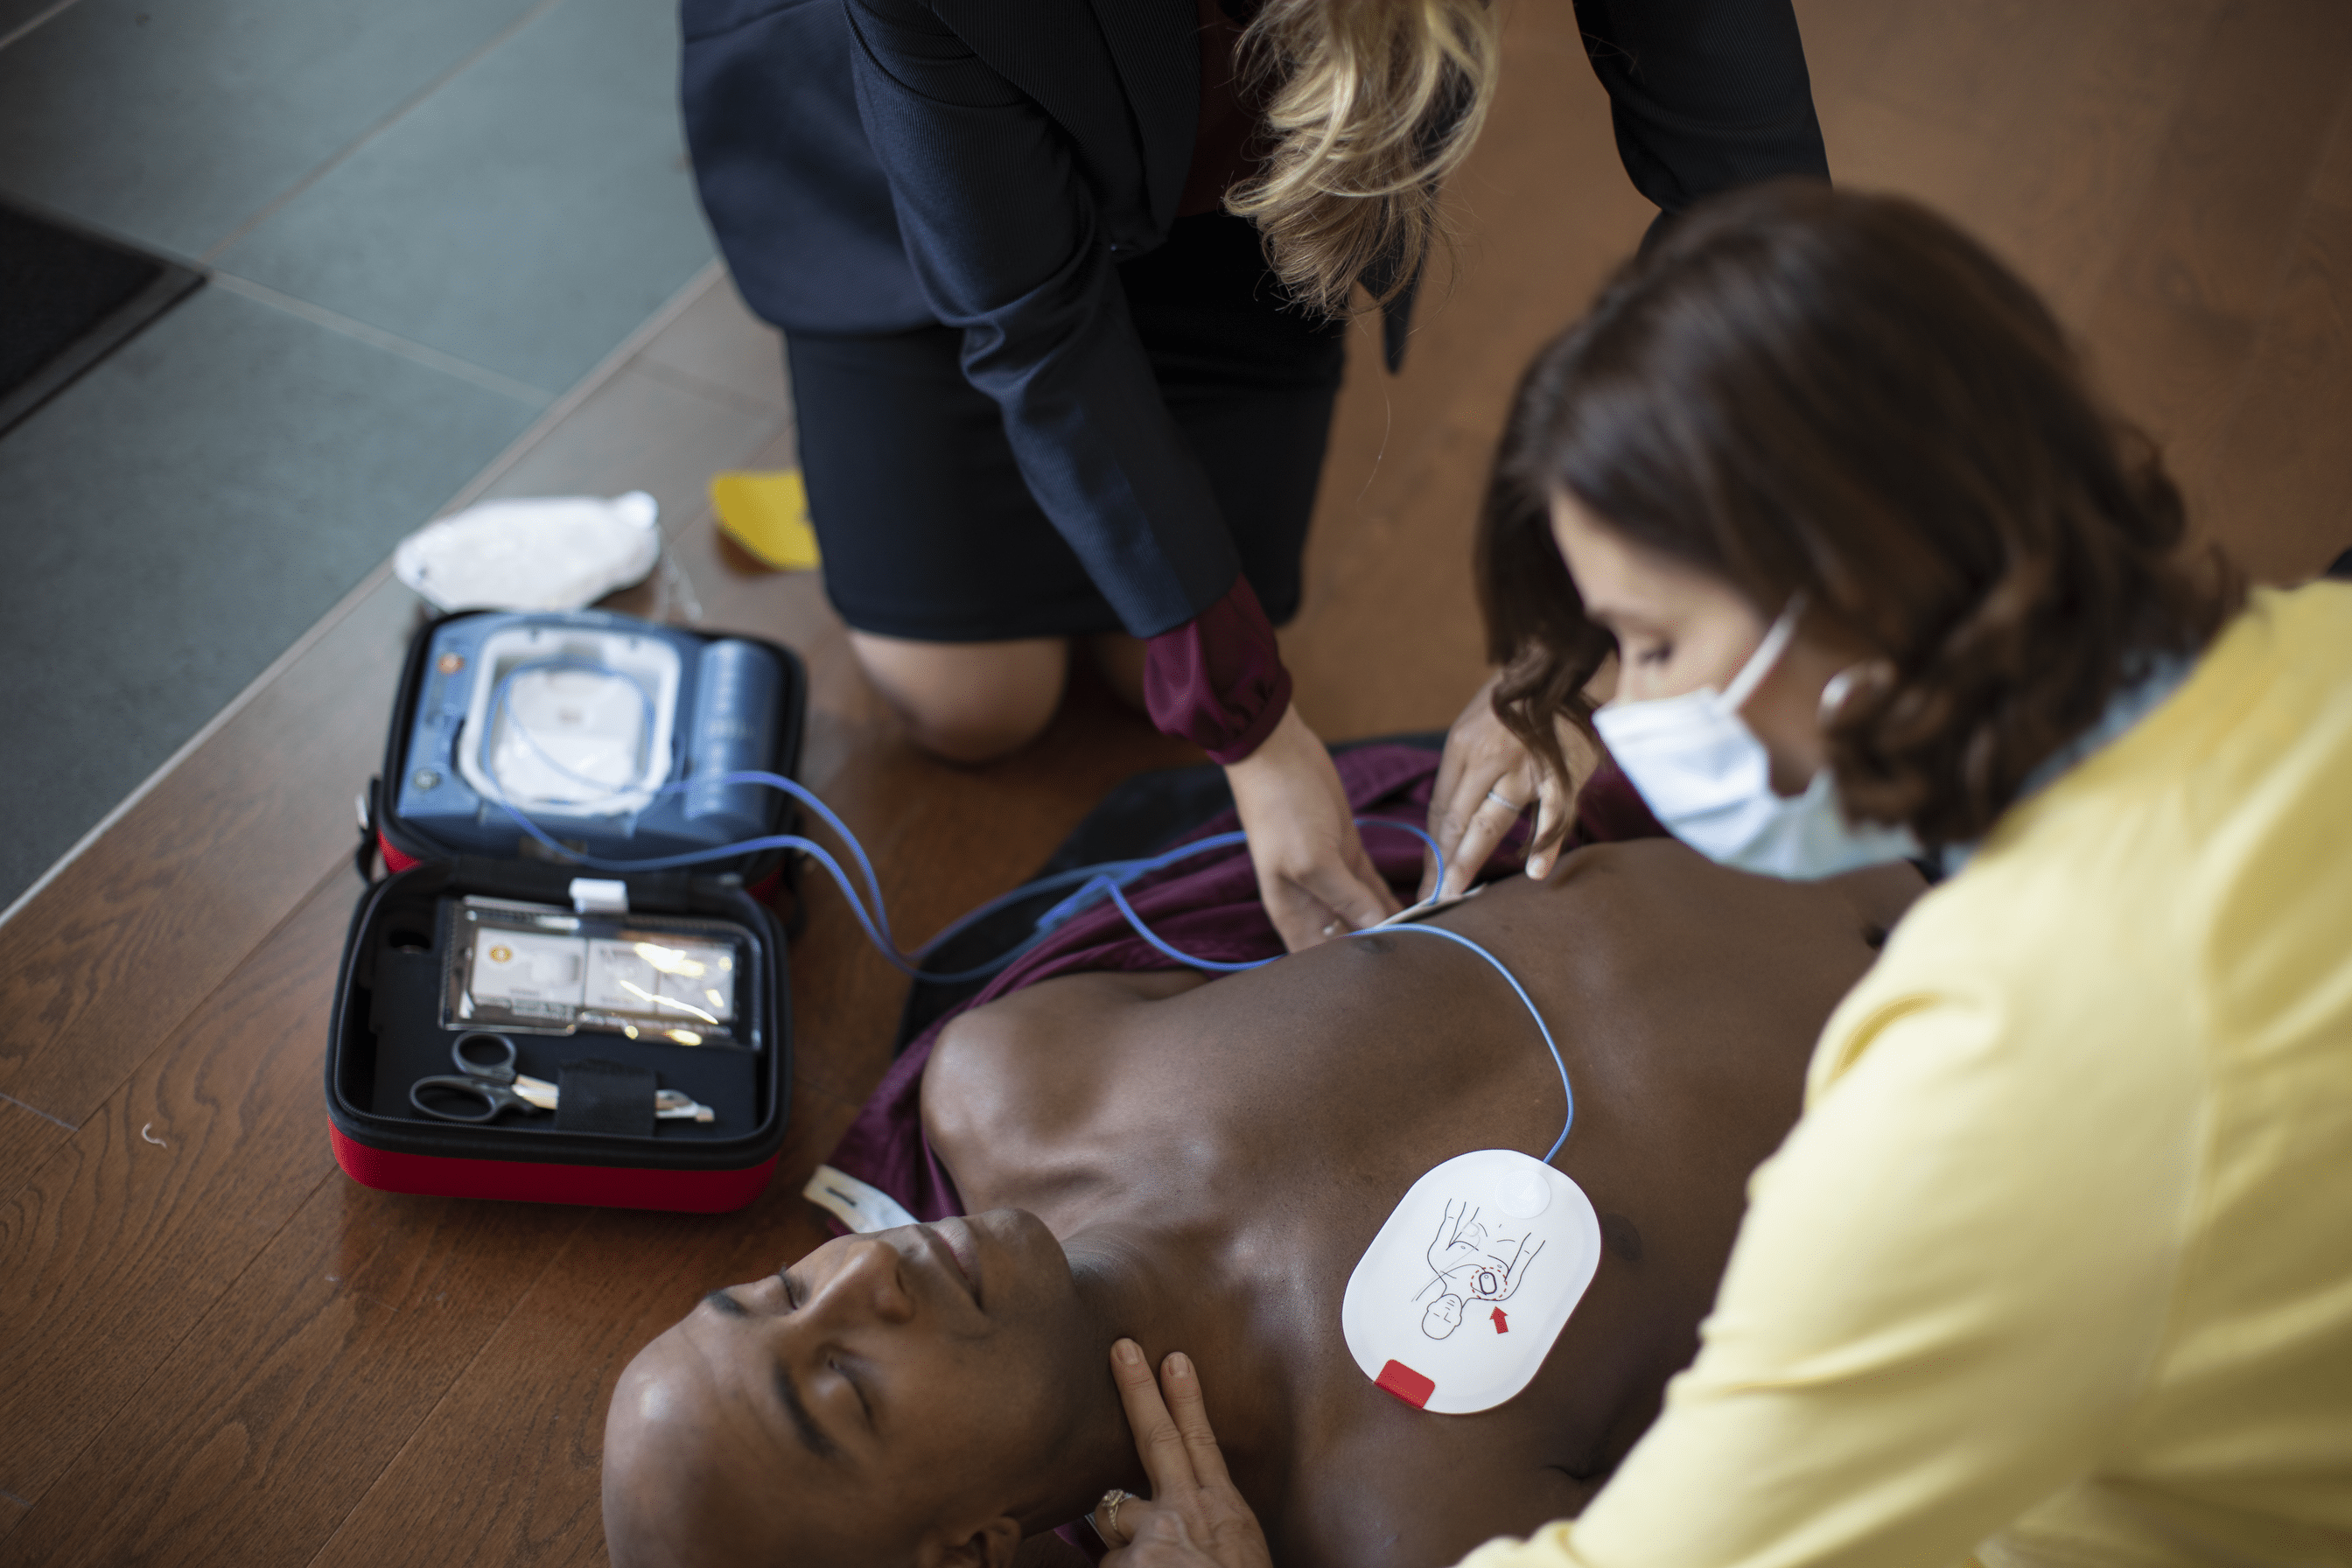 Philips HeartStart OnSite Automated External Defibrillator AED with Standard Carry Case, Battery and SMART Adult Pads